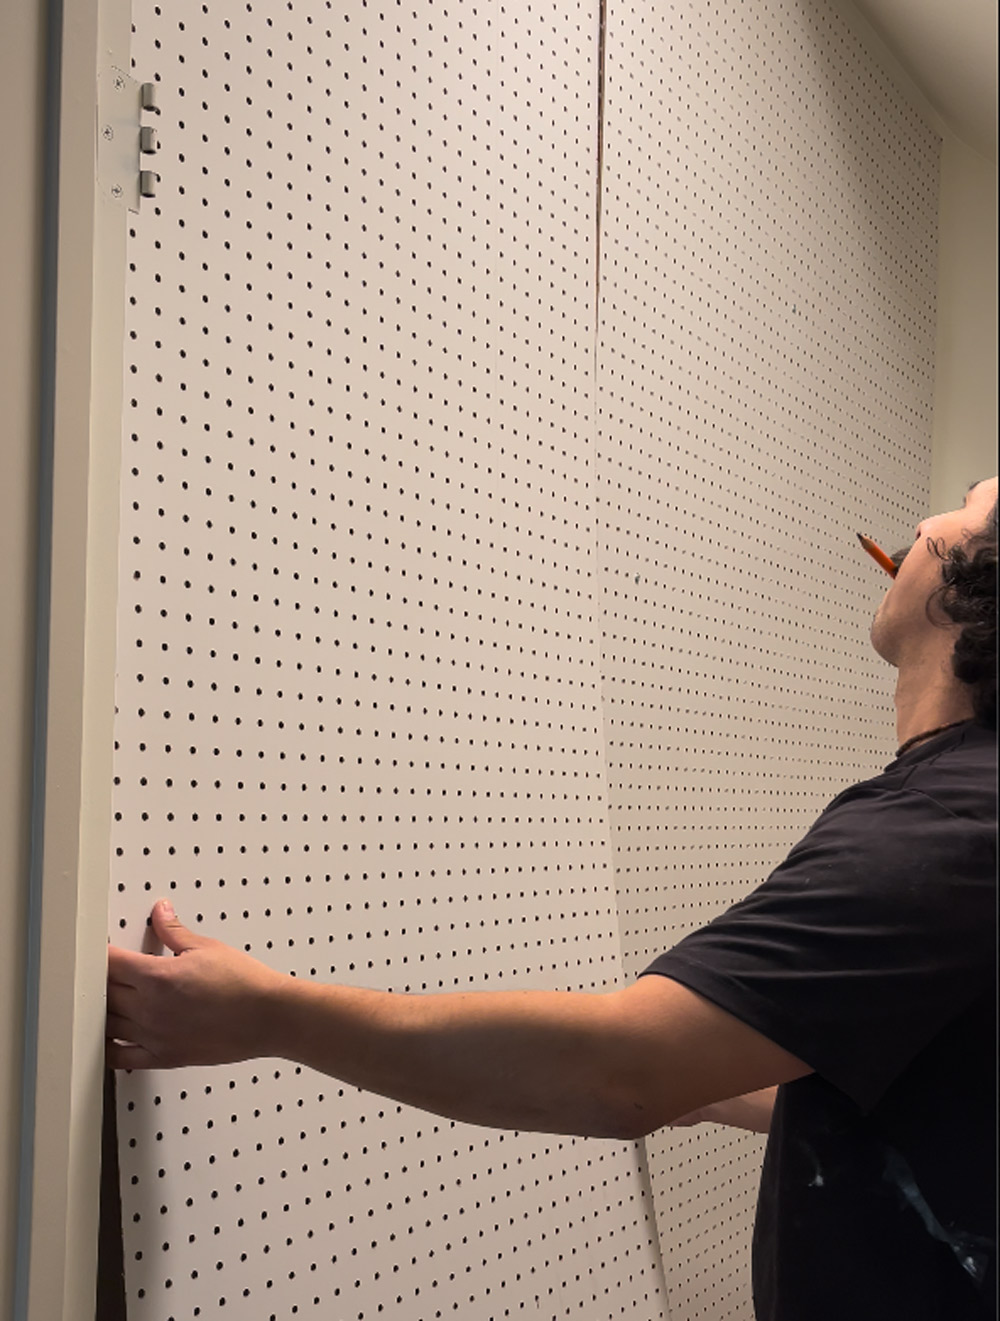 Pegboard held up being installed on a wall.